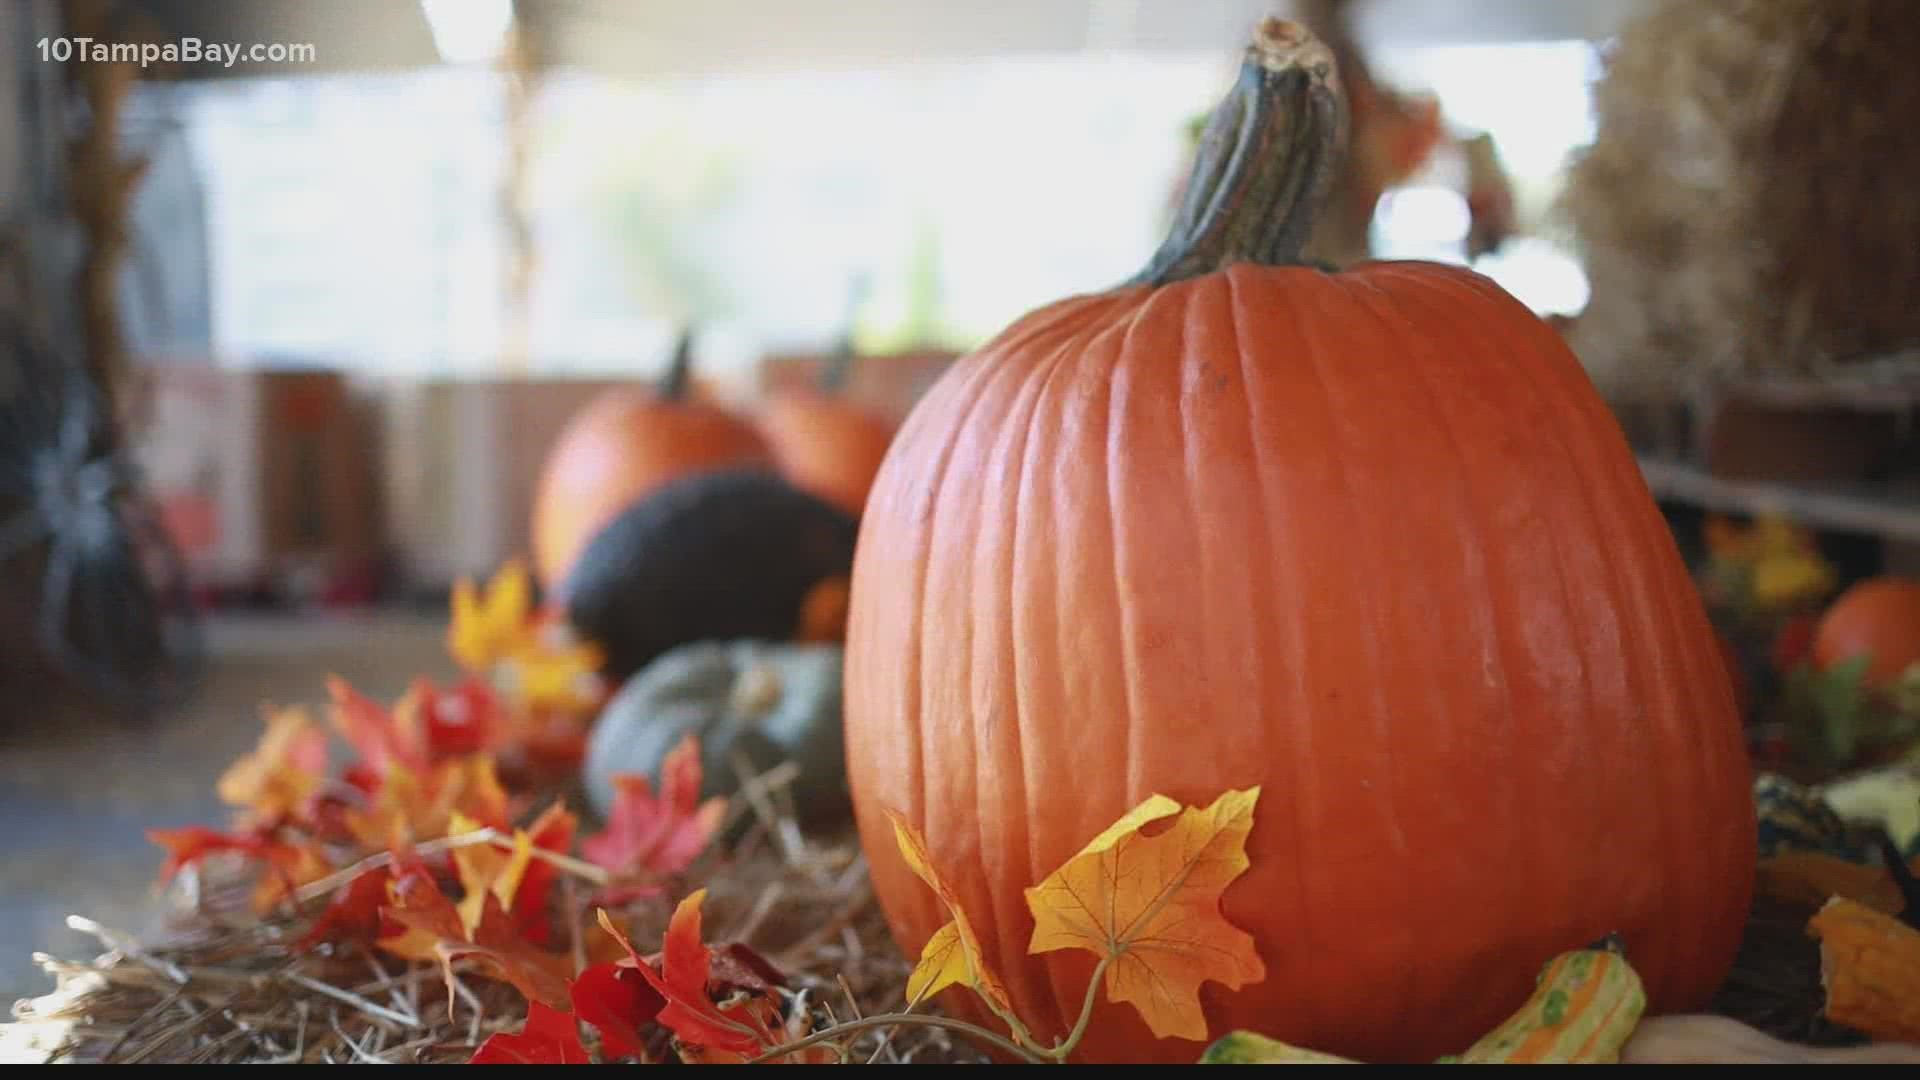 These pumpkin patches are bringing the fall to Florida.